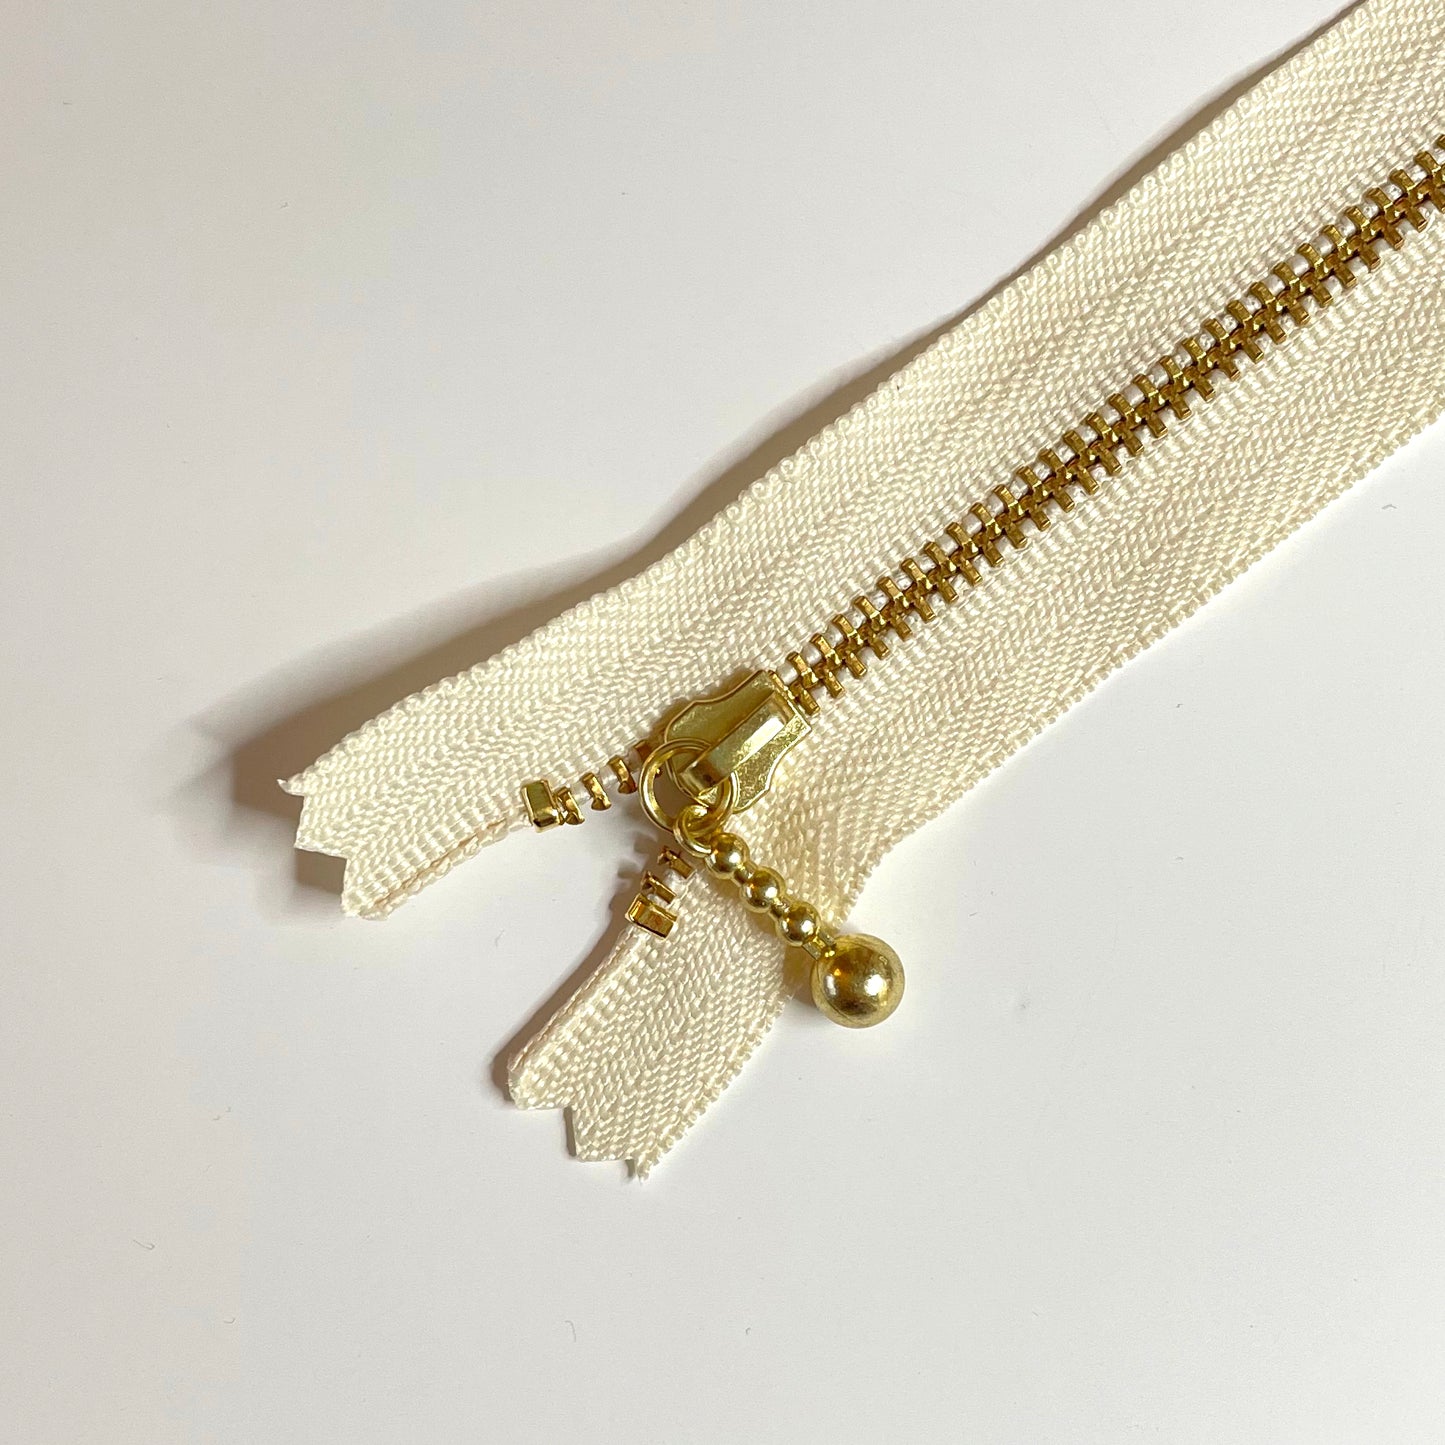 YKK Metalic Zippers with Water-drop Pull - Off-White (6 1/4" -16CM)